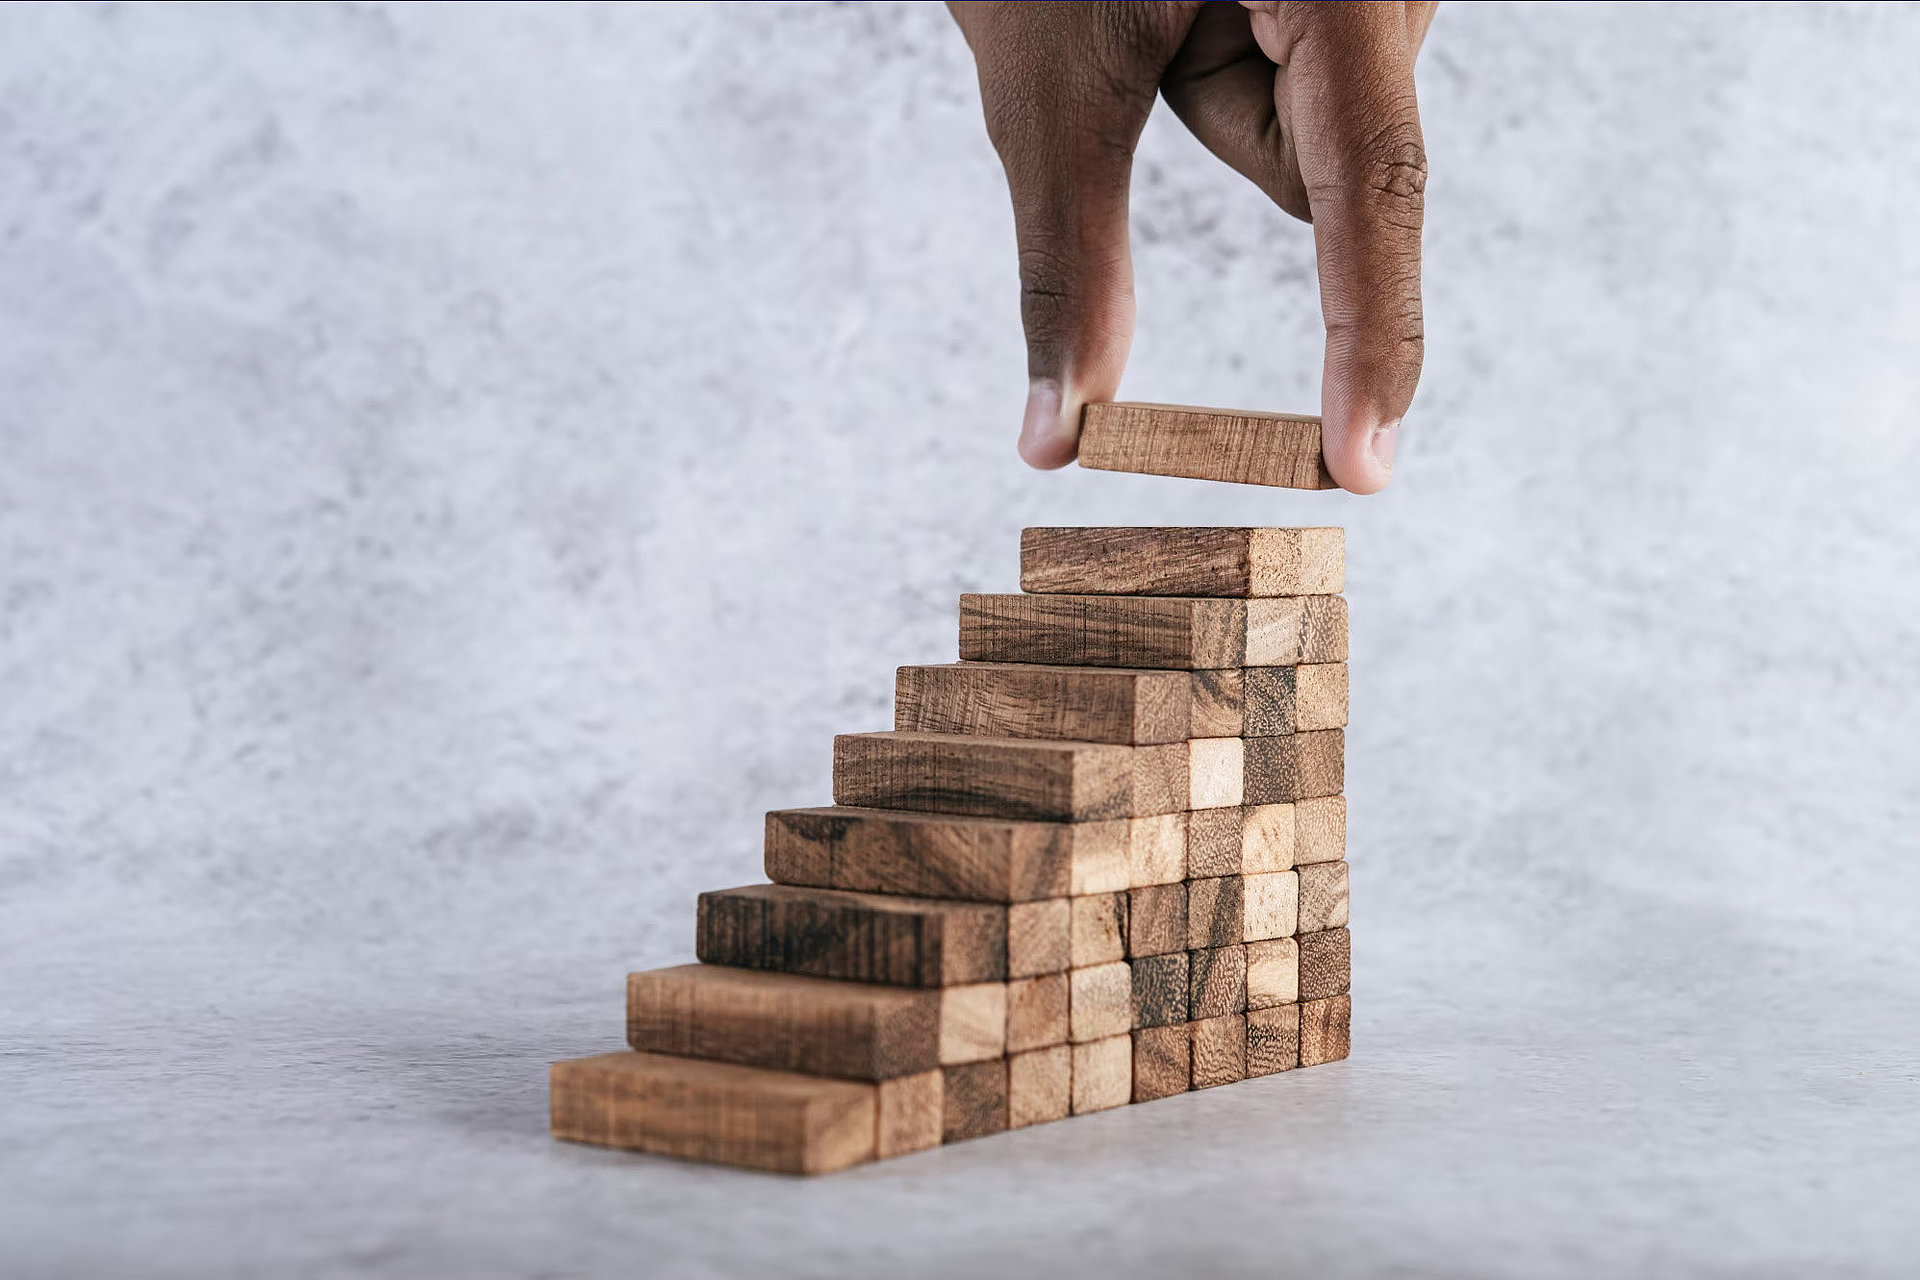 Staircase to success made of wooden blocks